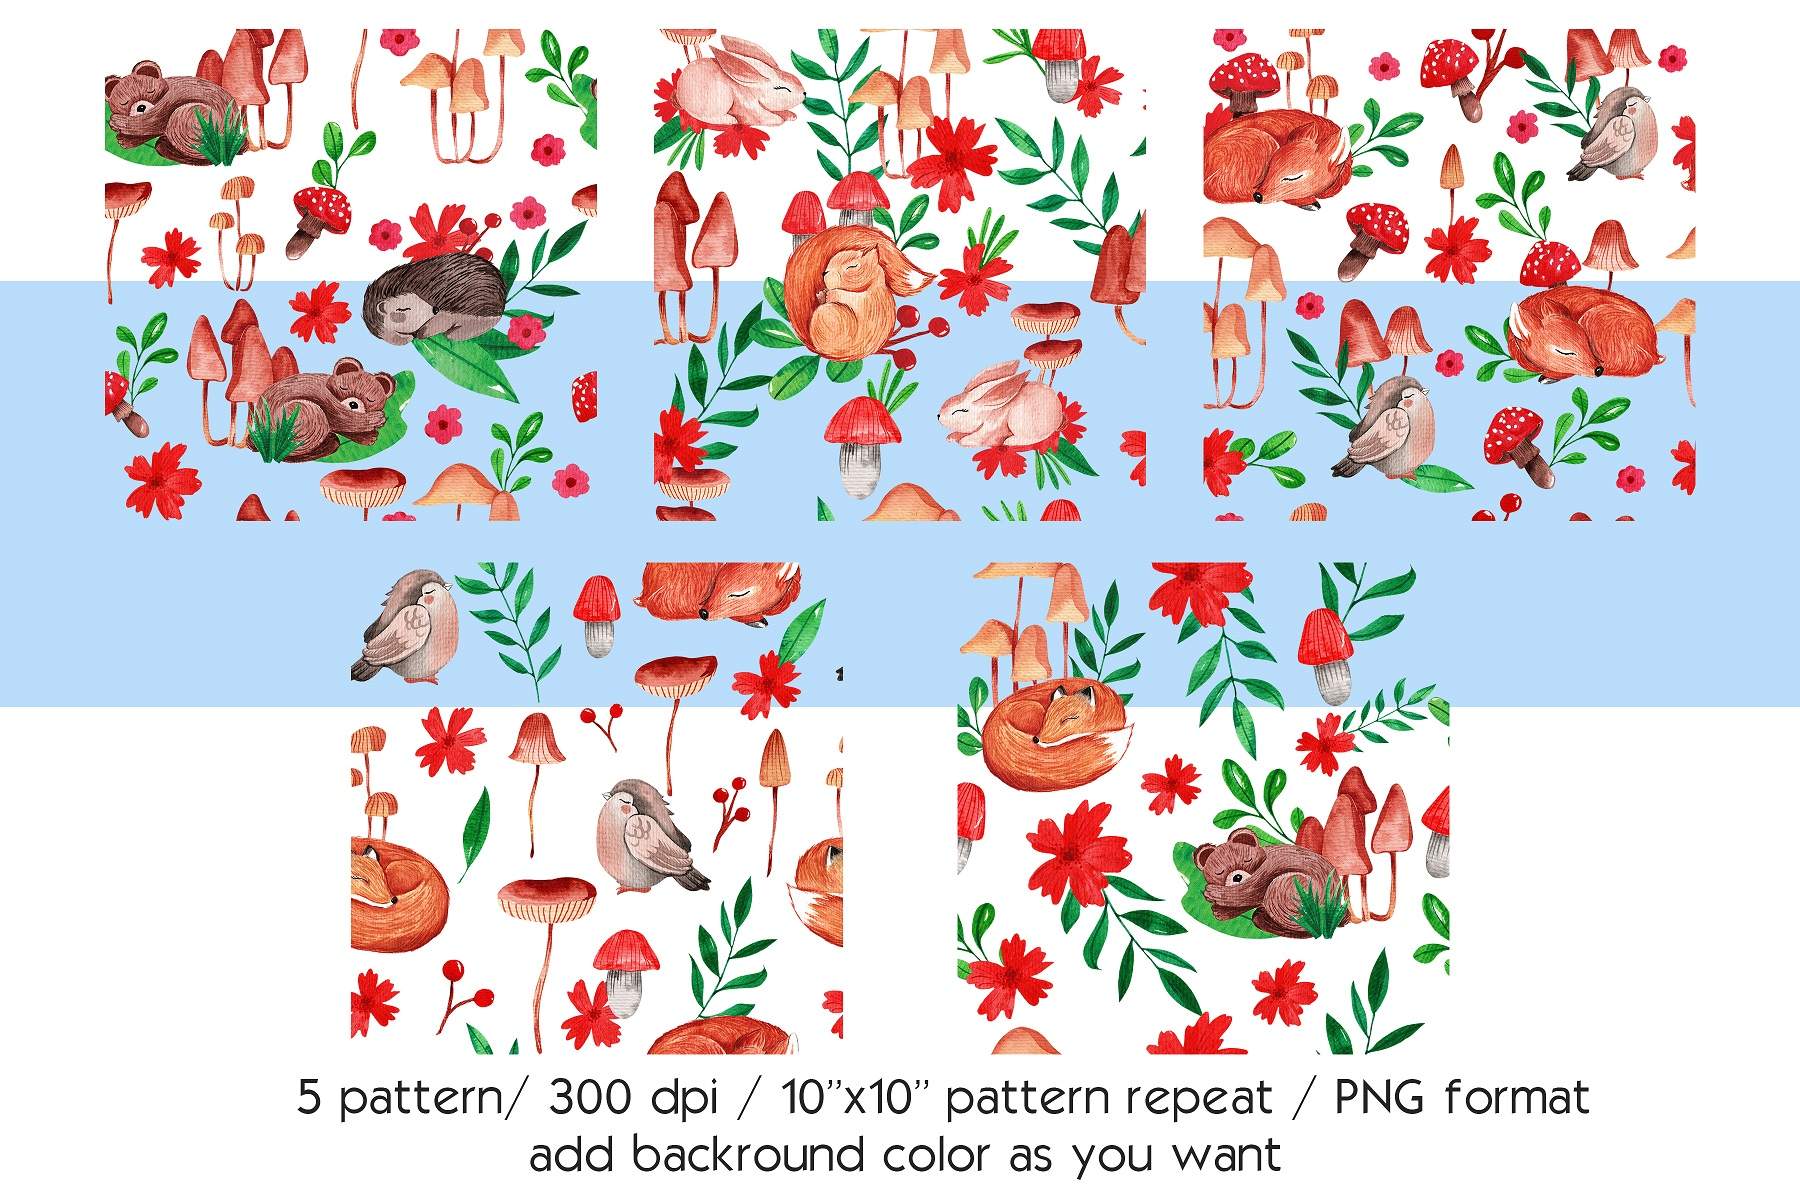 Pattern of animals and flowers on a blue and white background.